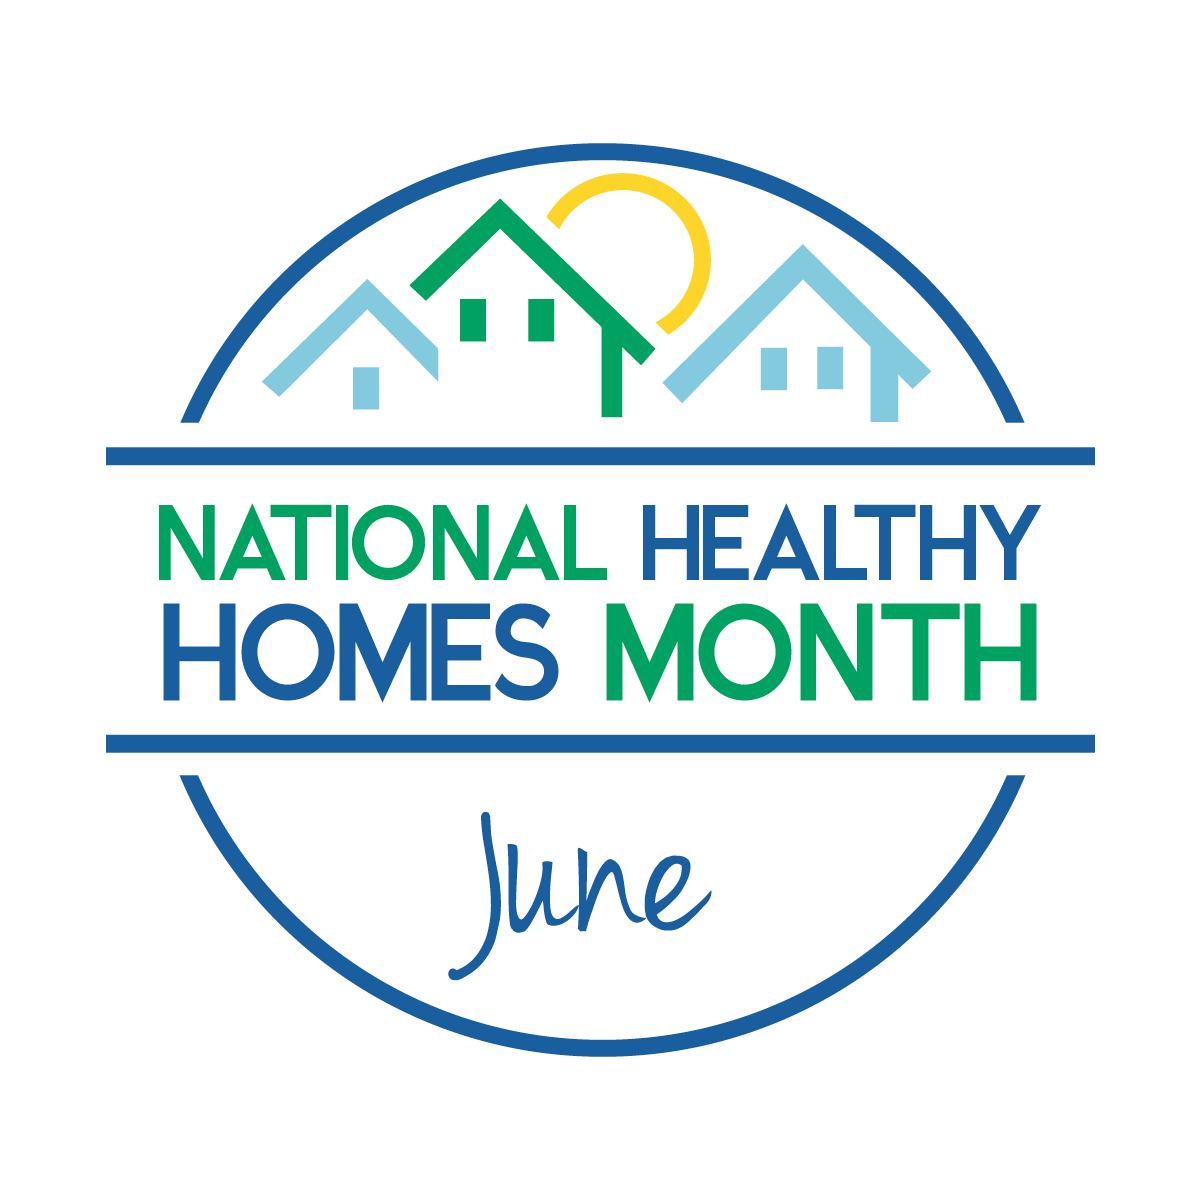 National Healthy Homes Month 2018 logo